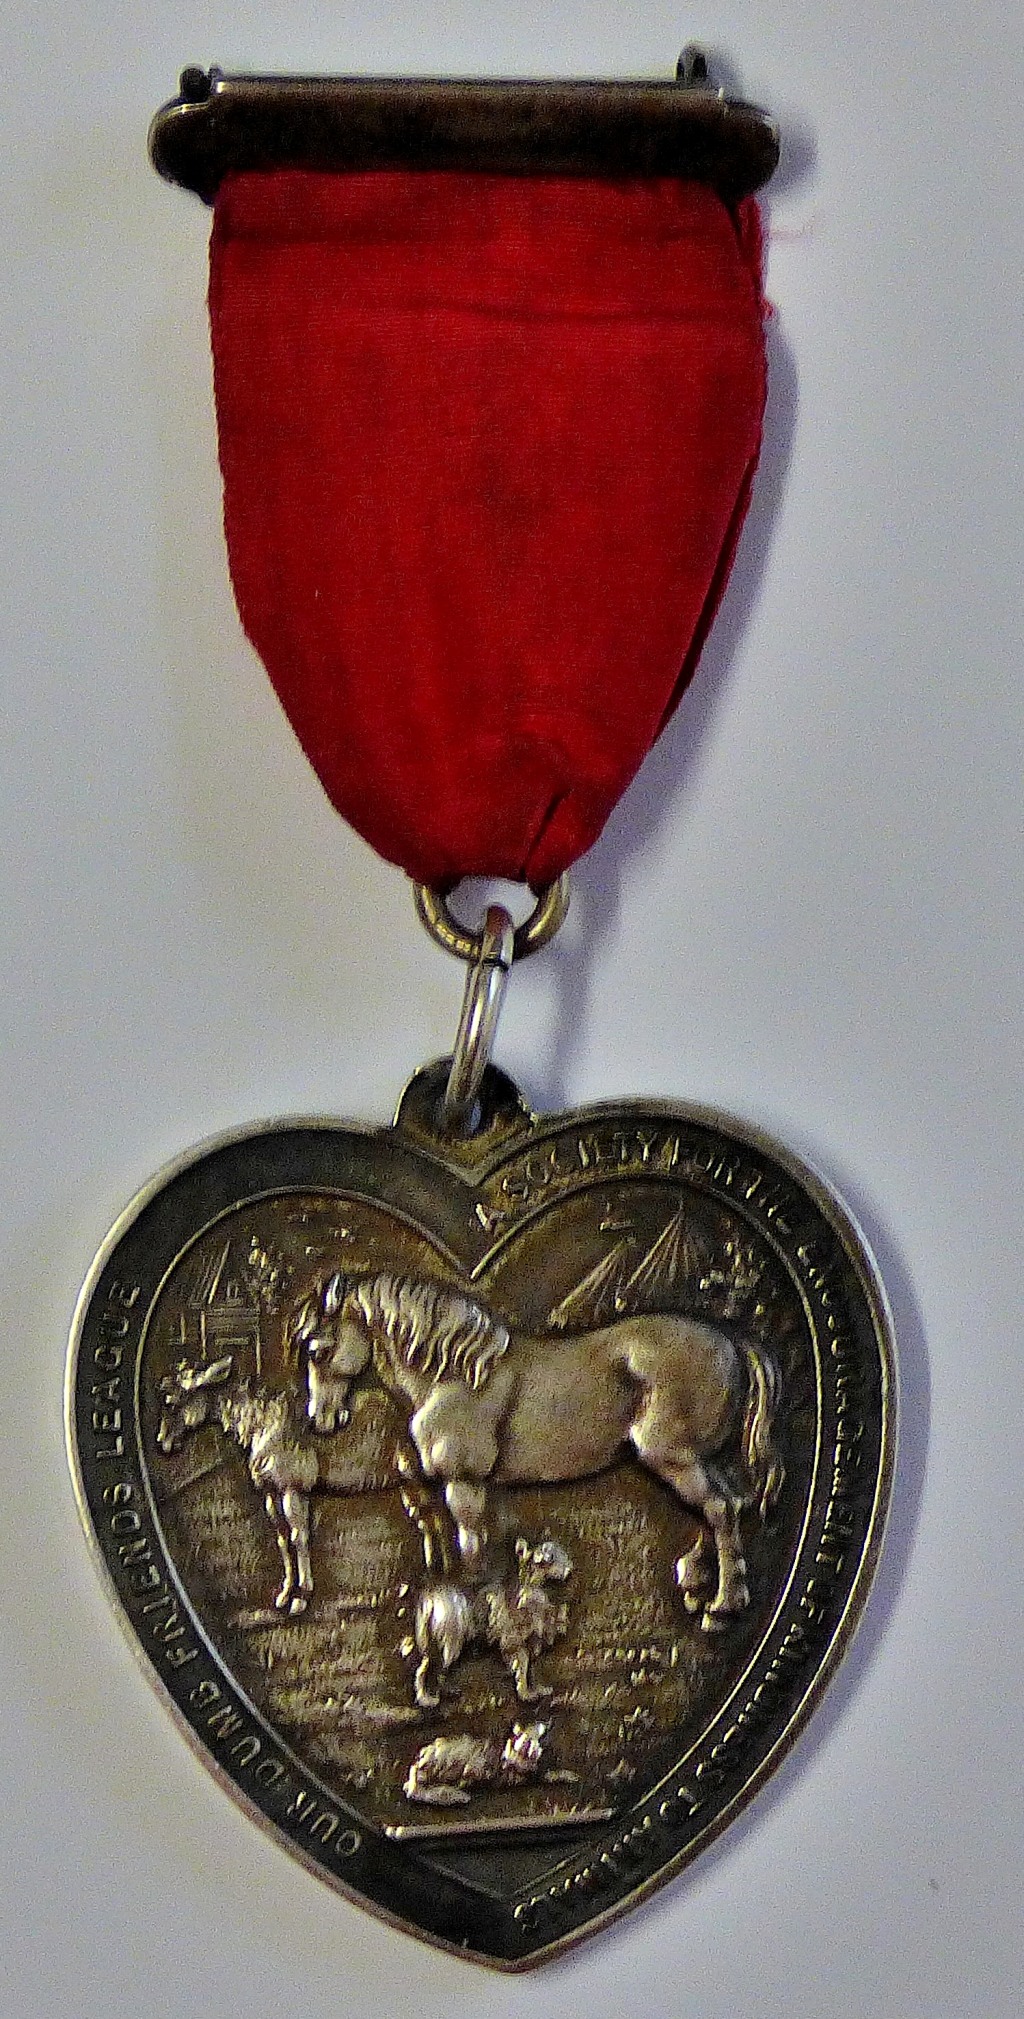 British 'Our/Dumb' Friends League Silver Medal, Awarded 1934 to Edwin P. Prattern for conspicuous